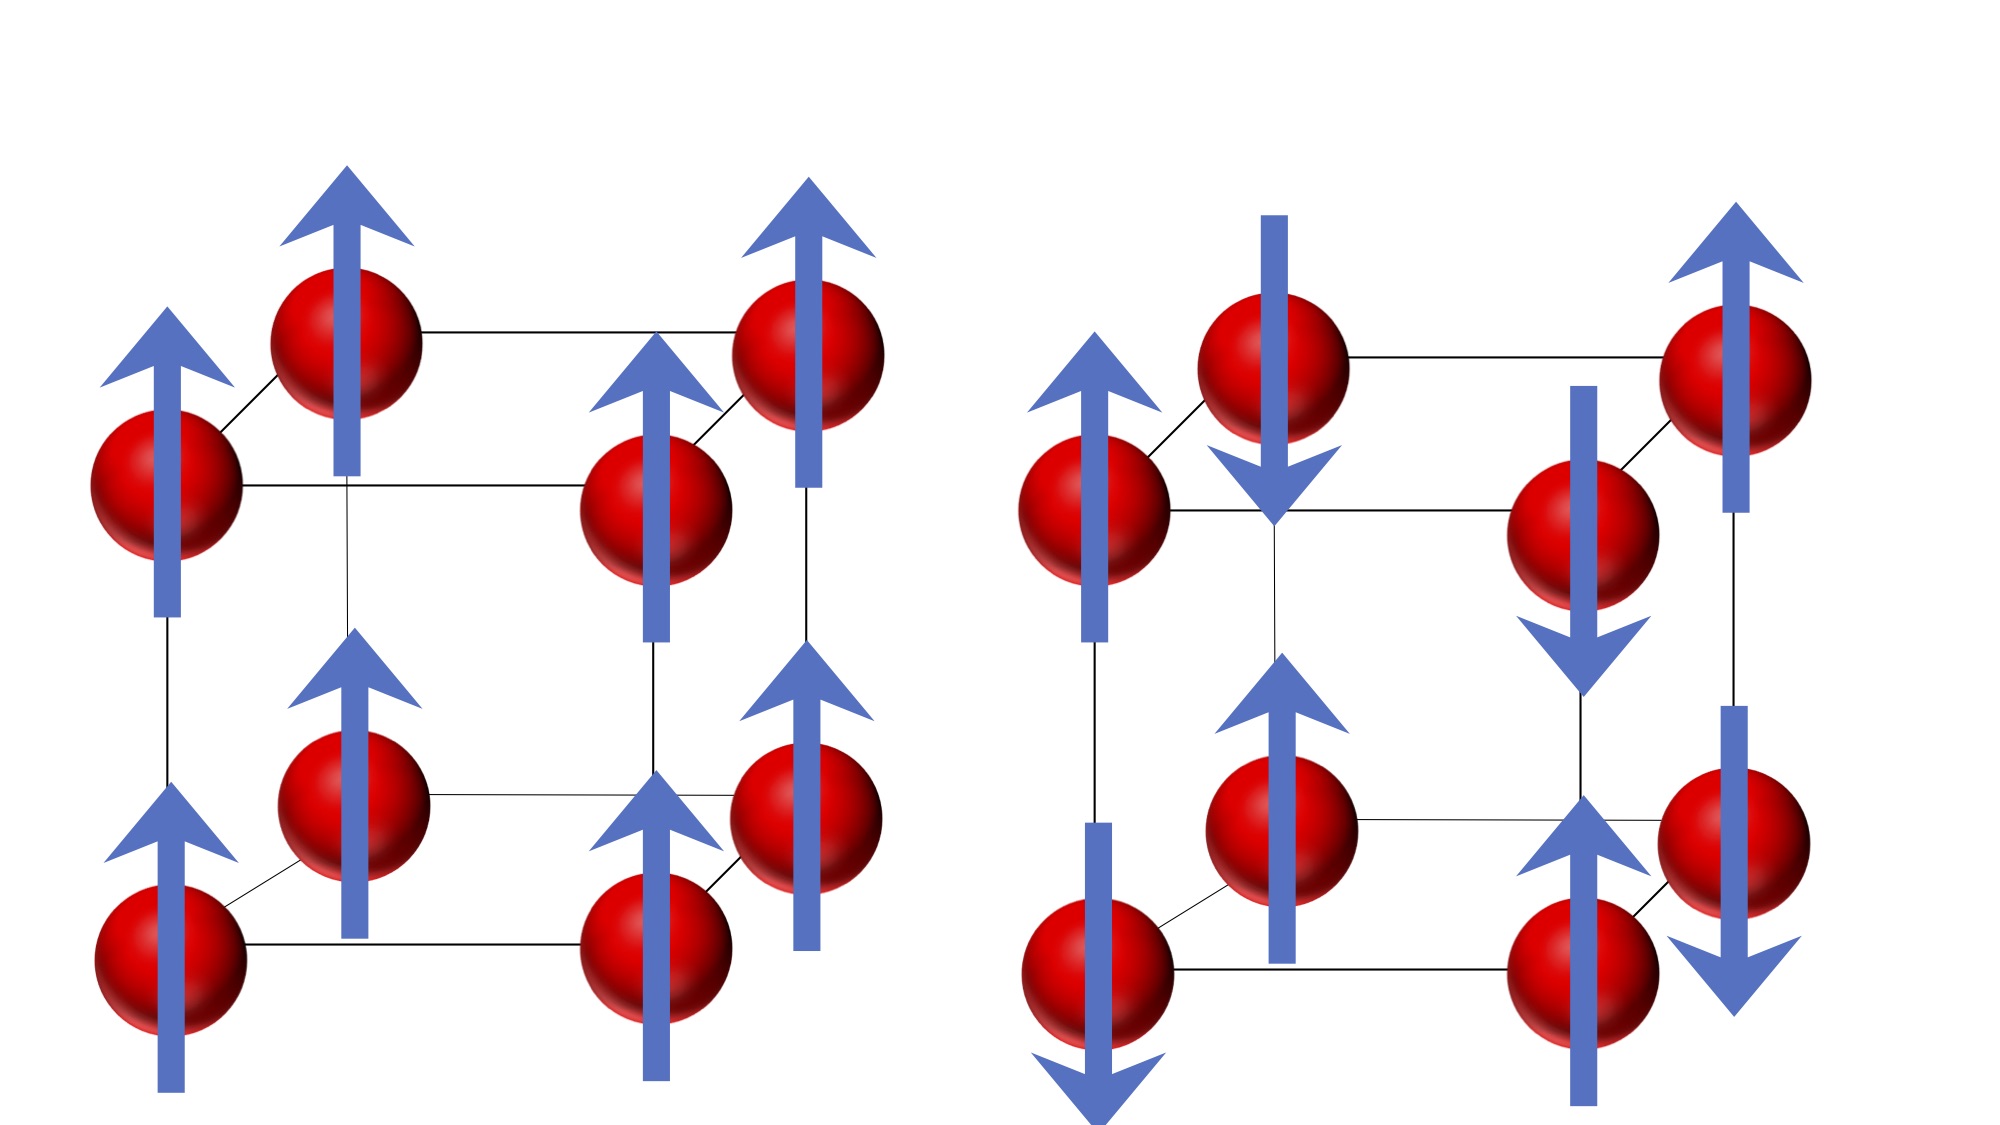 In a ferromagnet (left), the magnetic moments of the atoms point in one direction.  In an antiferromagnet (right), the magnetic moments alternate. 